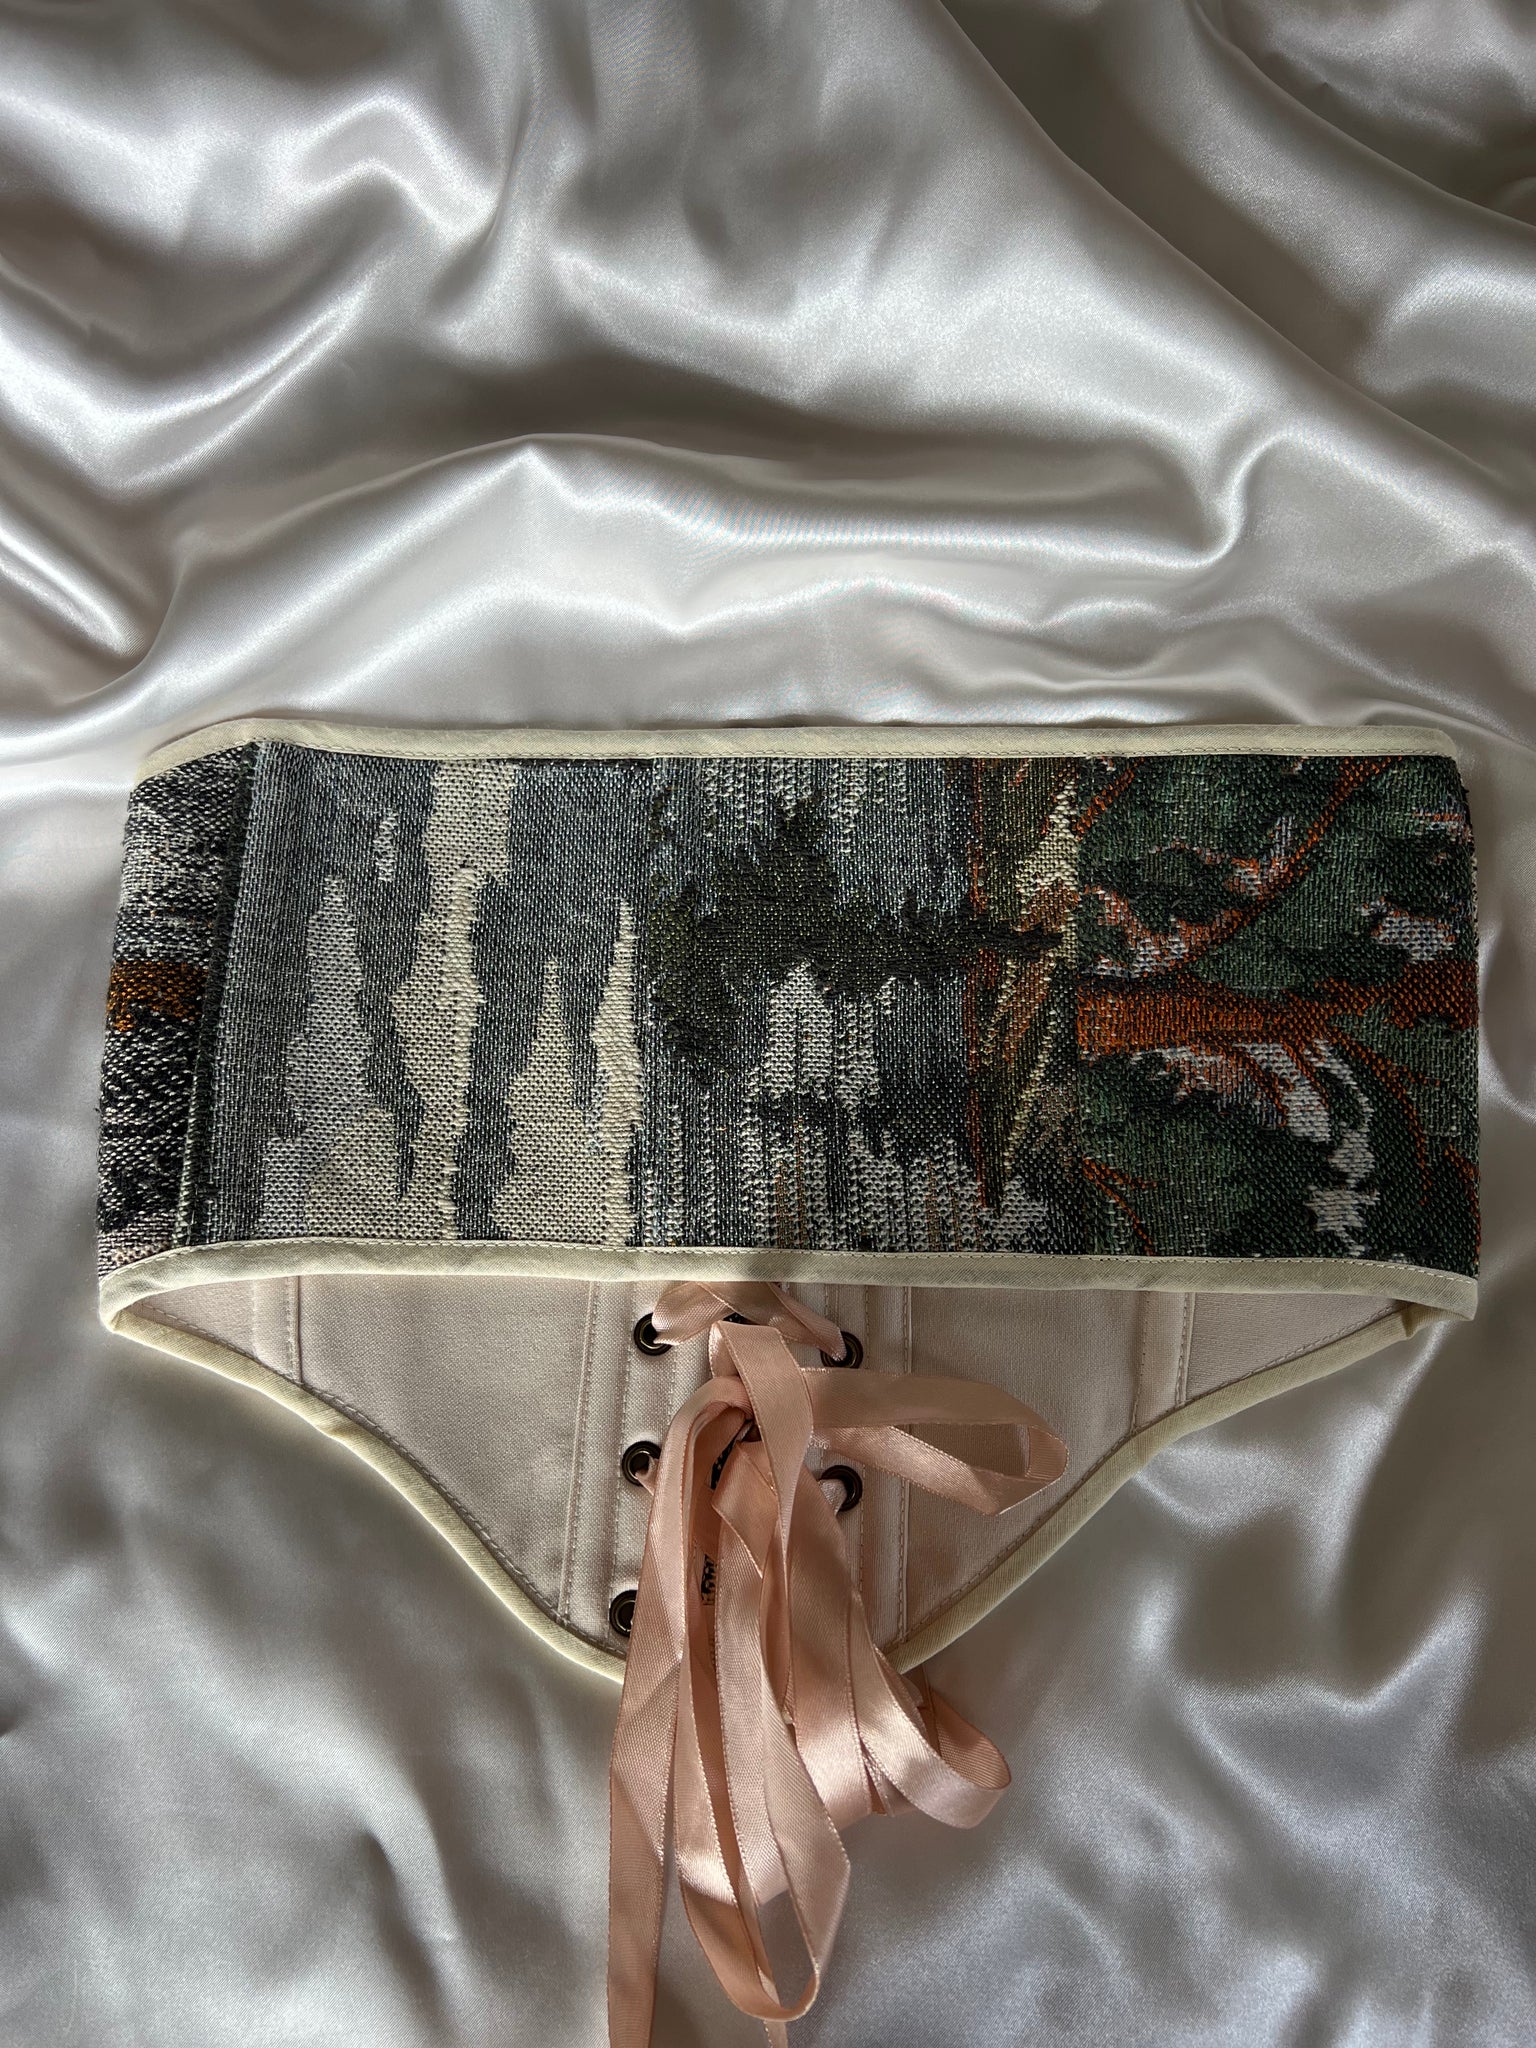 NEW Vintage Tapestry Lace-up Corset Belt, “Forest Scene” pattern, Size S-M (US 2-8)